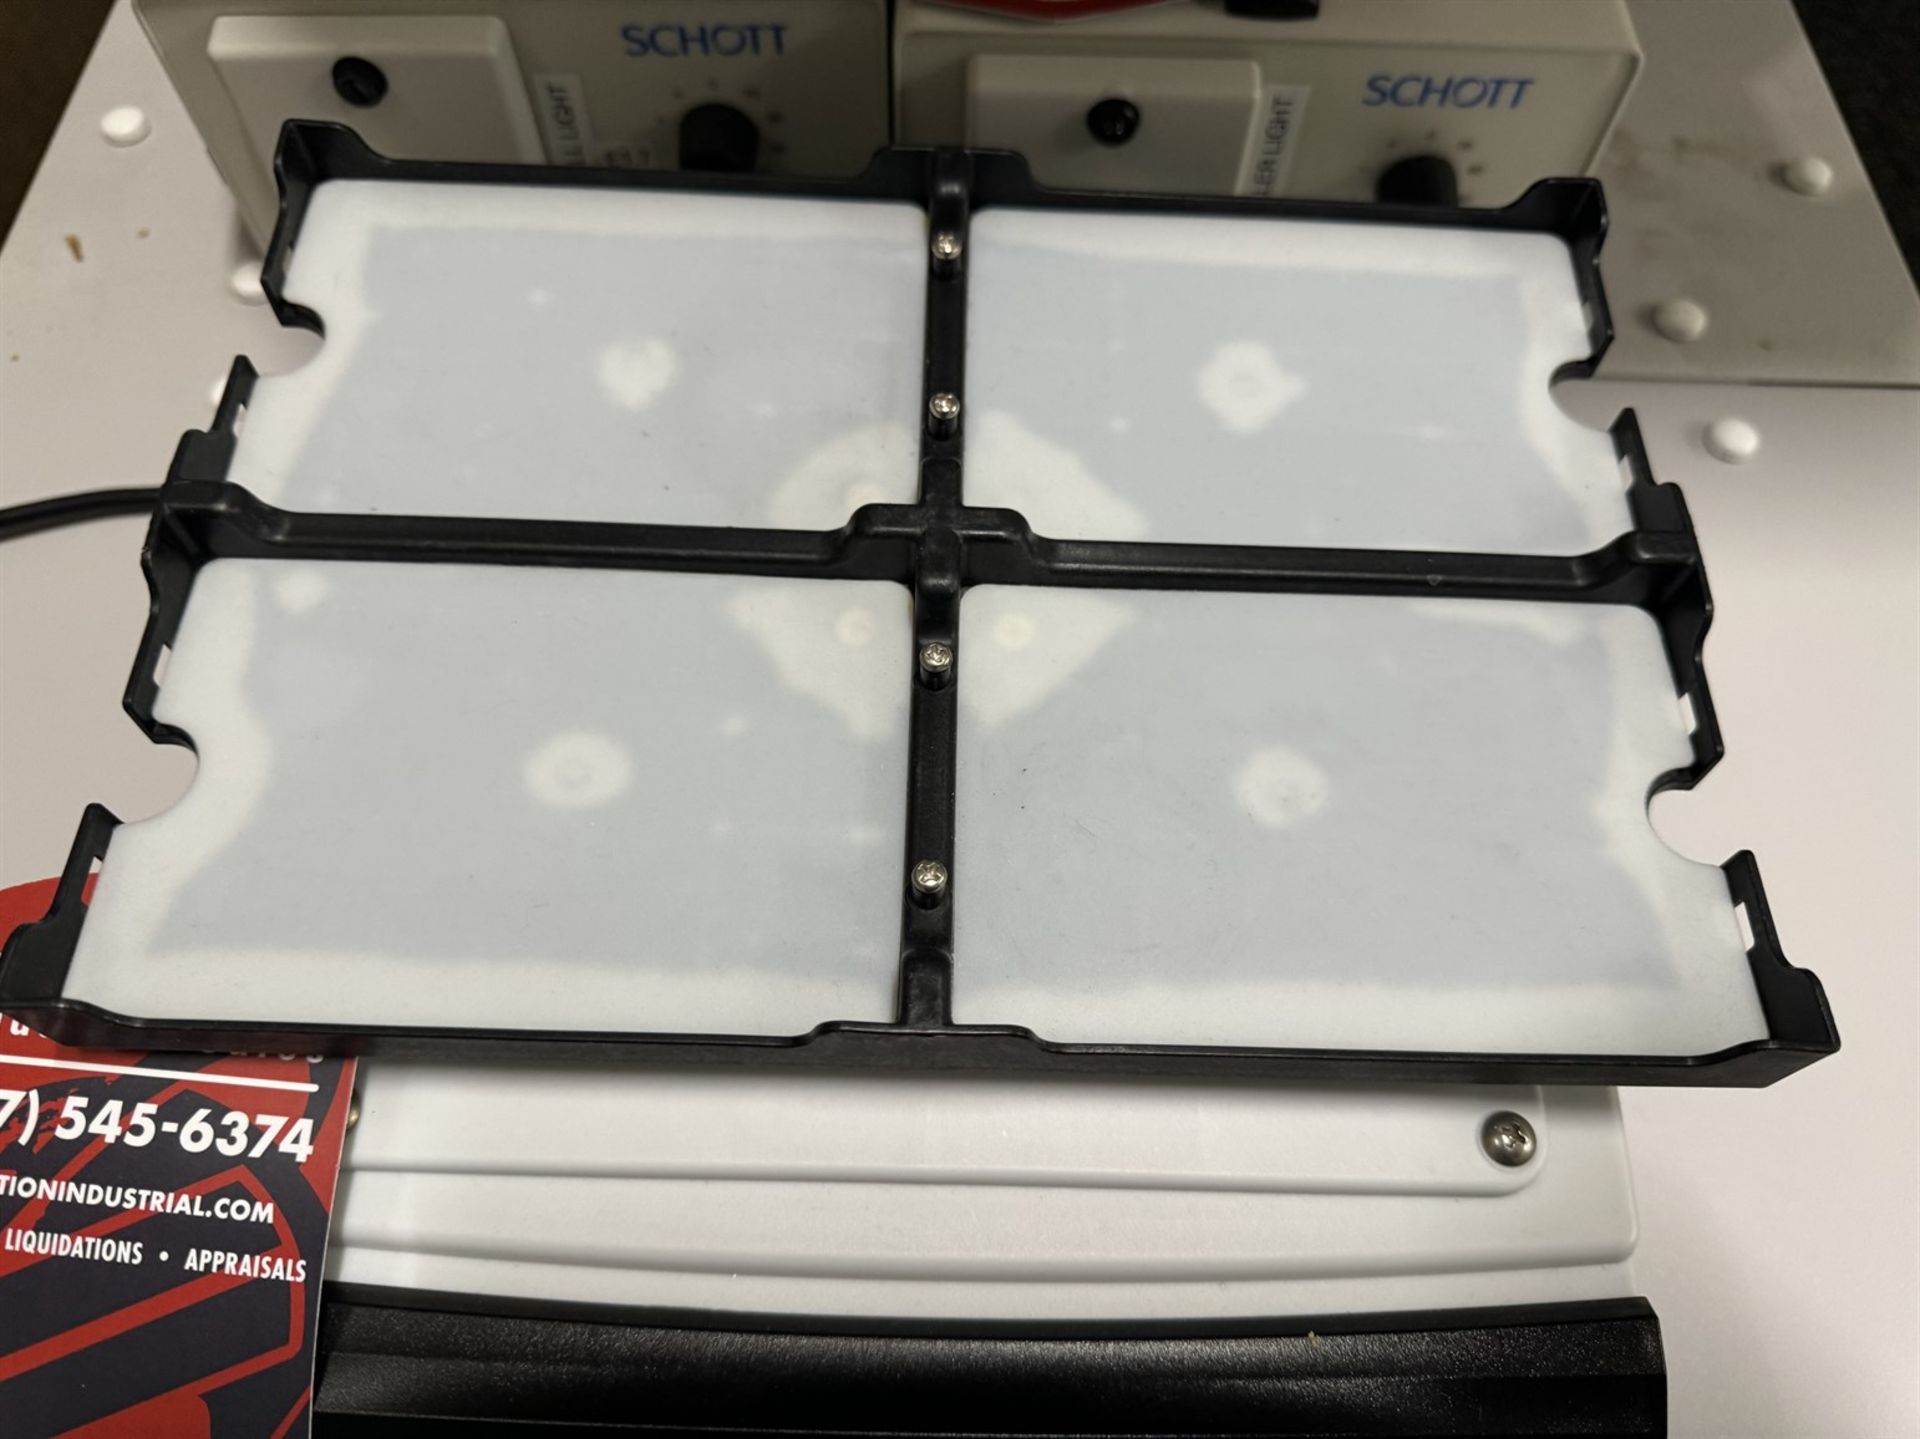 THERMO SCIENTIFIC Compact Digital Microplate Shaker, s/n EAKT23055 - Image 3 of 4